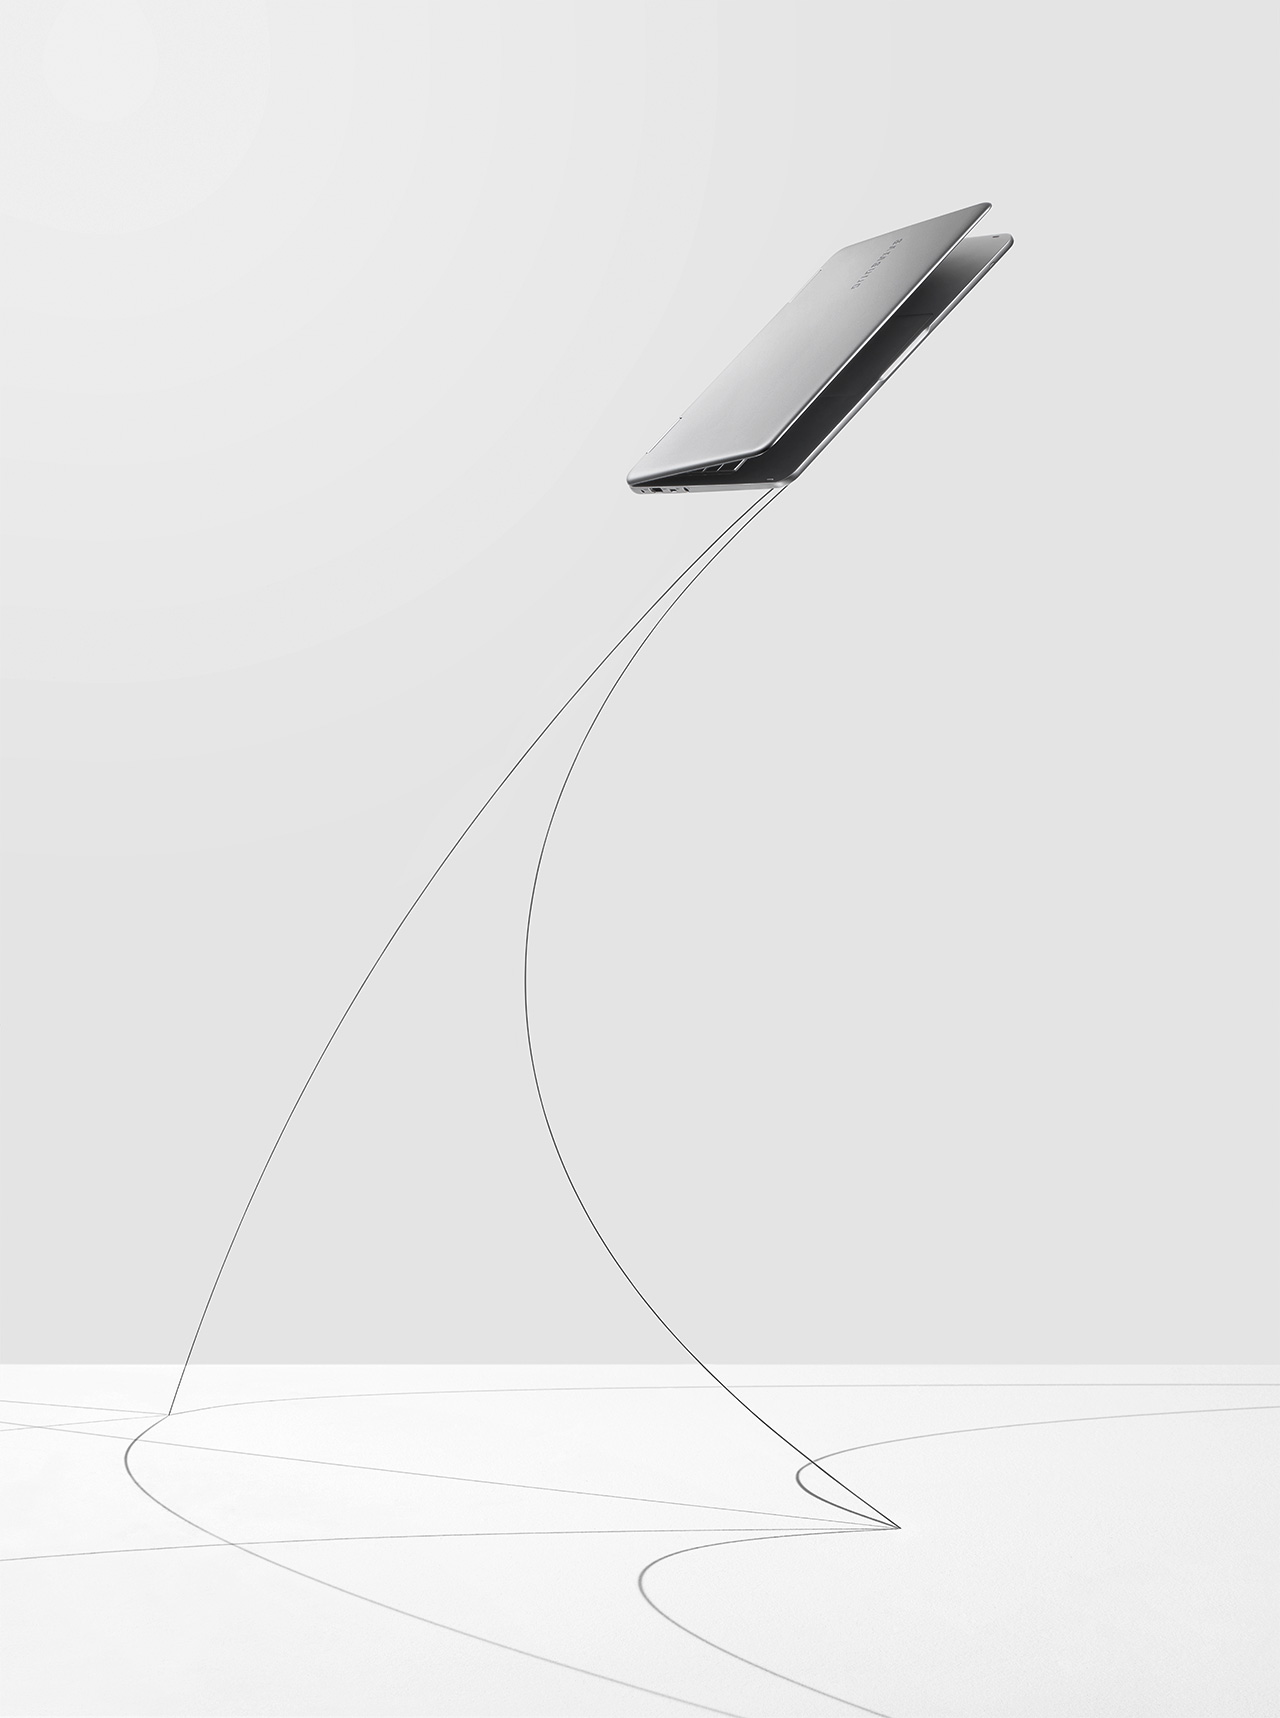 A video shows Samsung Notebook Pen gracefully balancing on the edge of a wire.